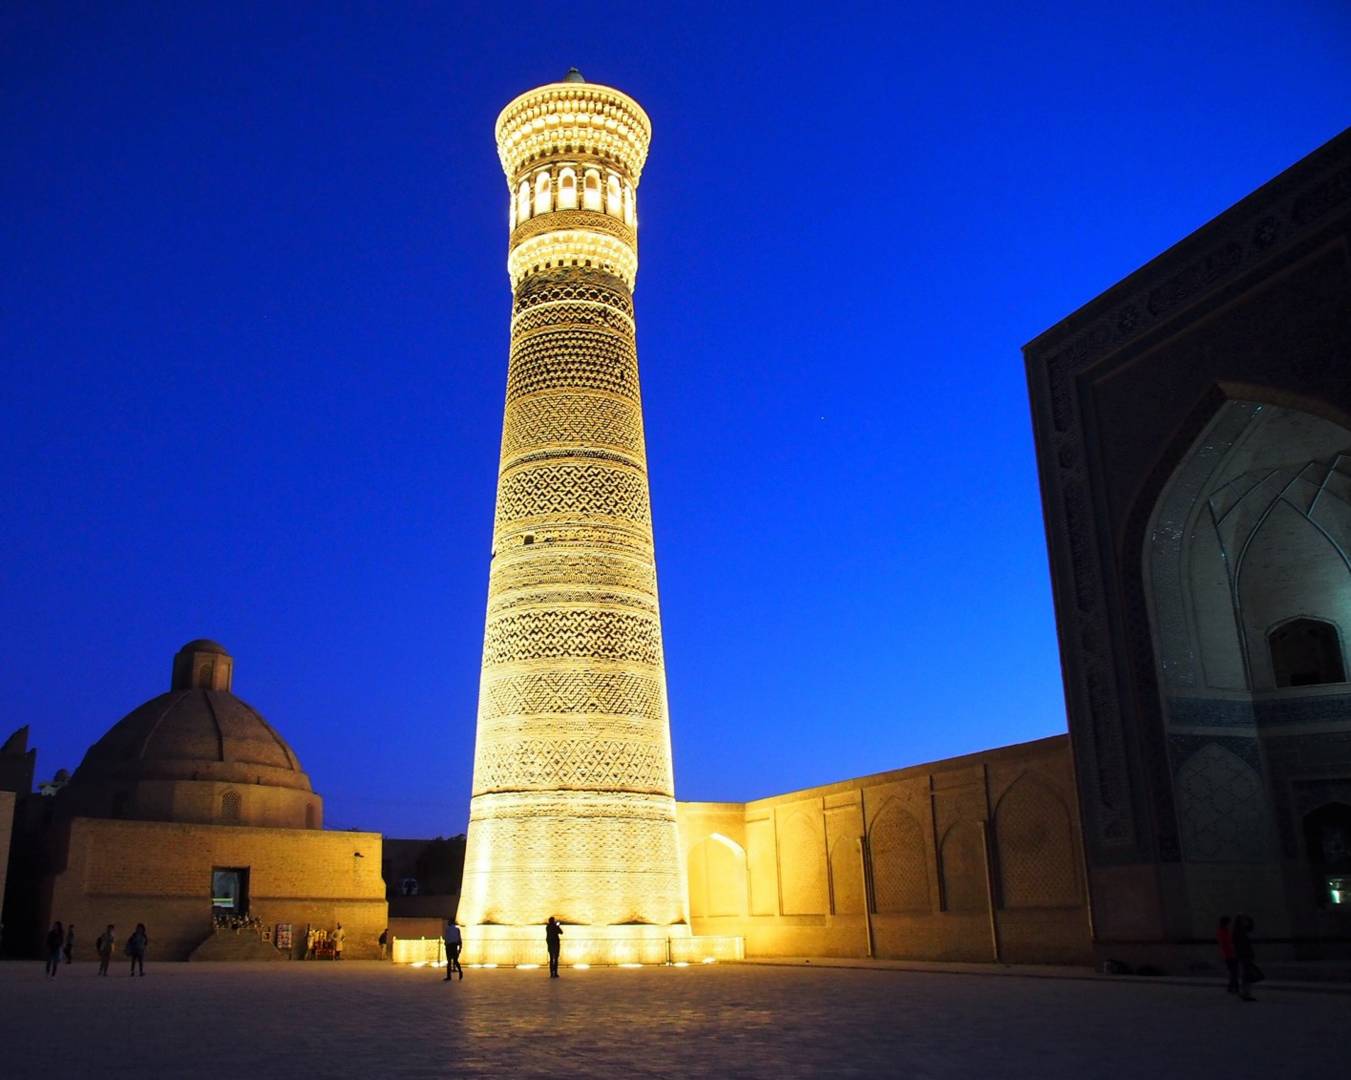 The 10th century tower Kaylan minaret in Bukhara, Uzbekistan. Robyn went out and caught her image hand held at night, while the rest of us were at dinner